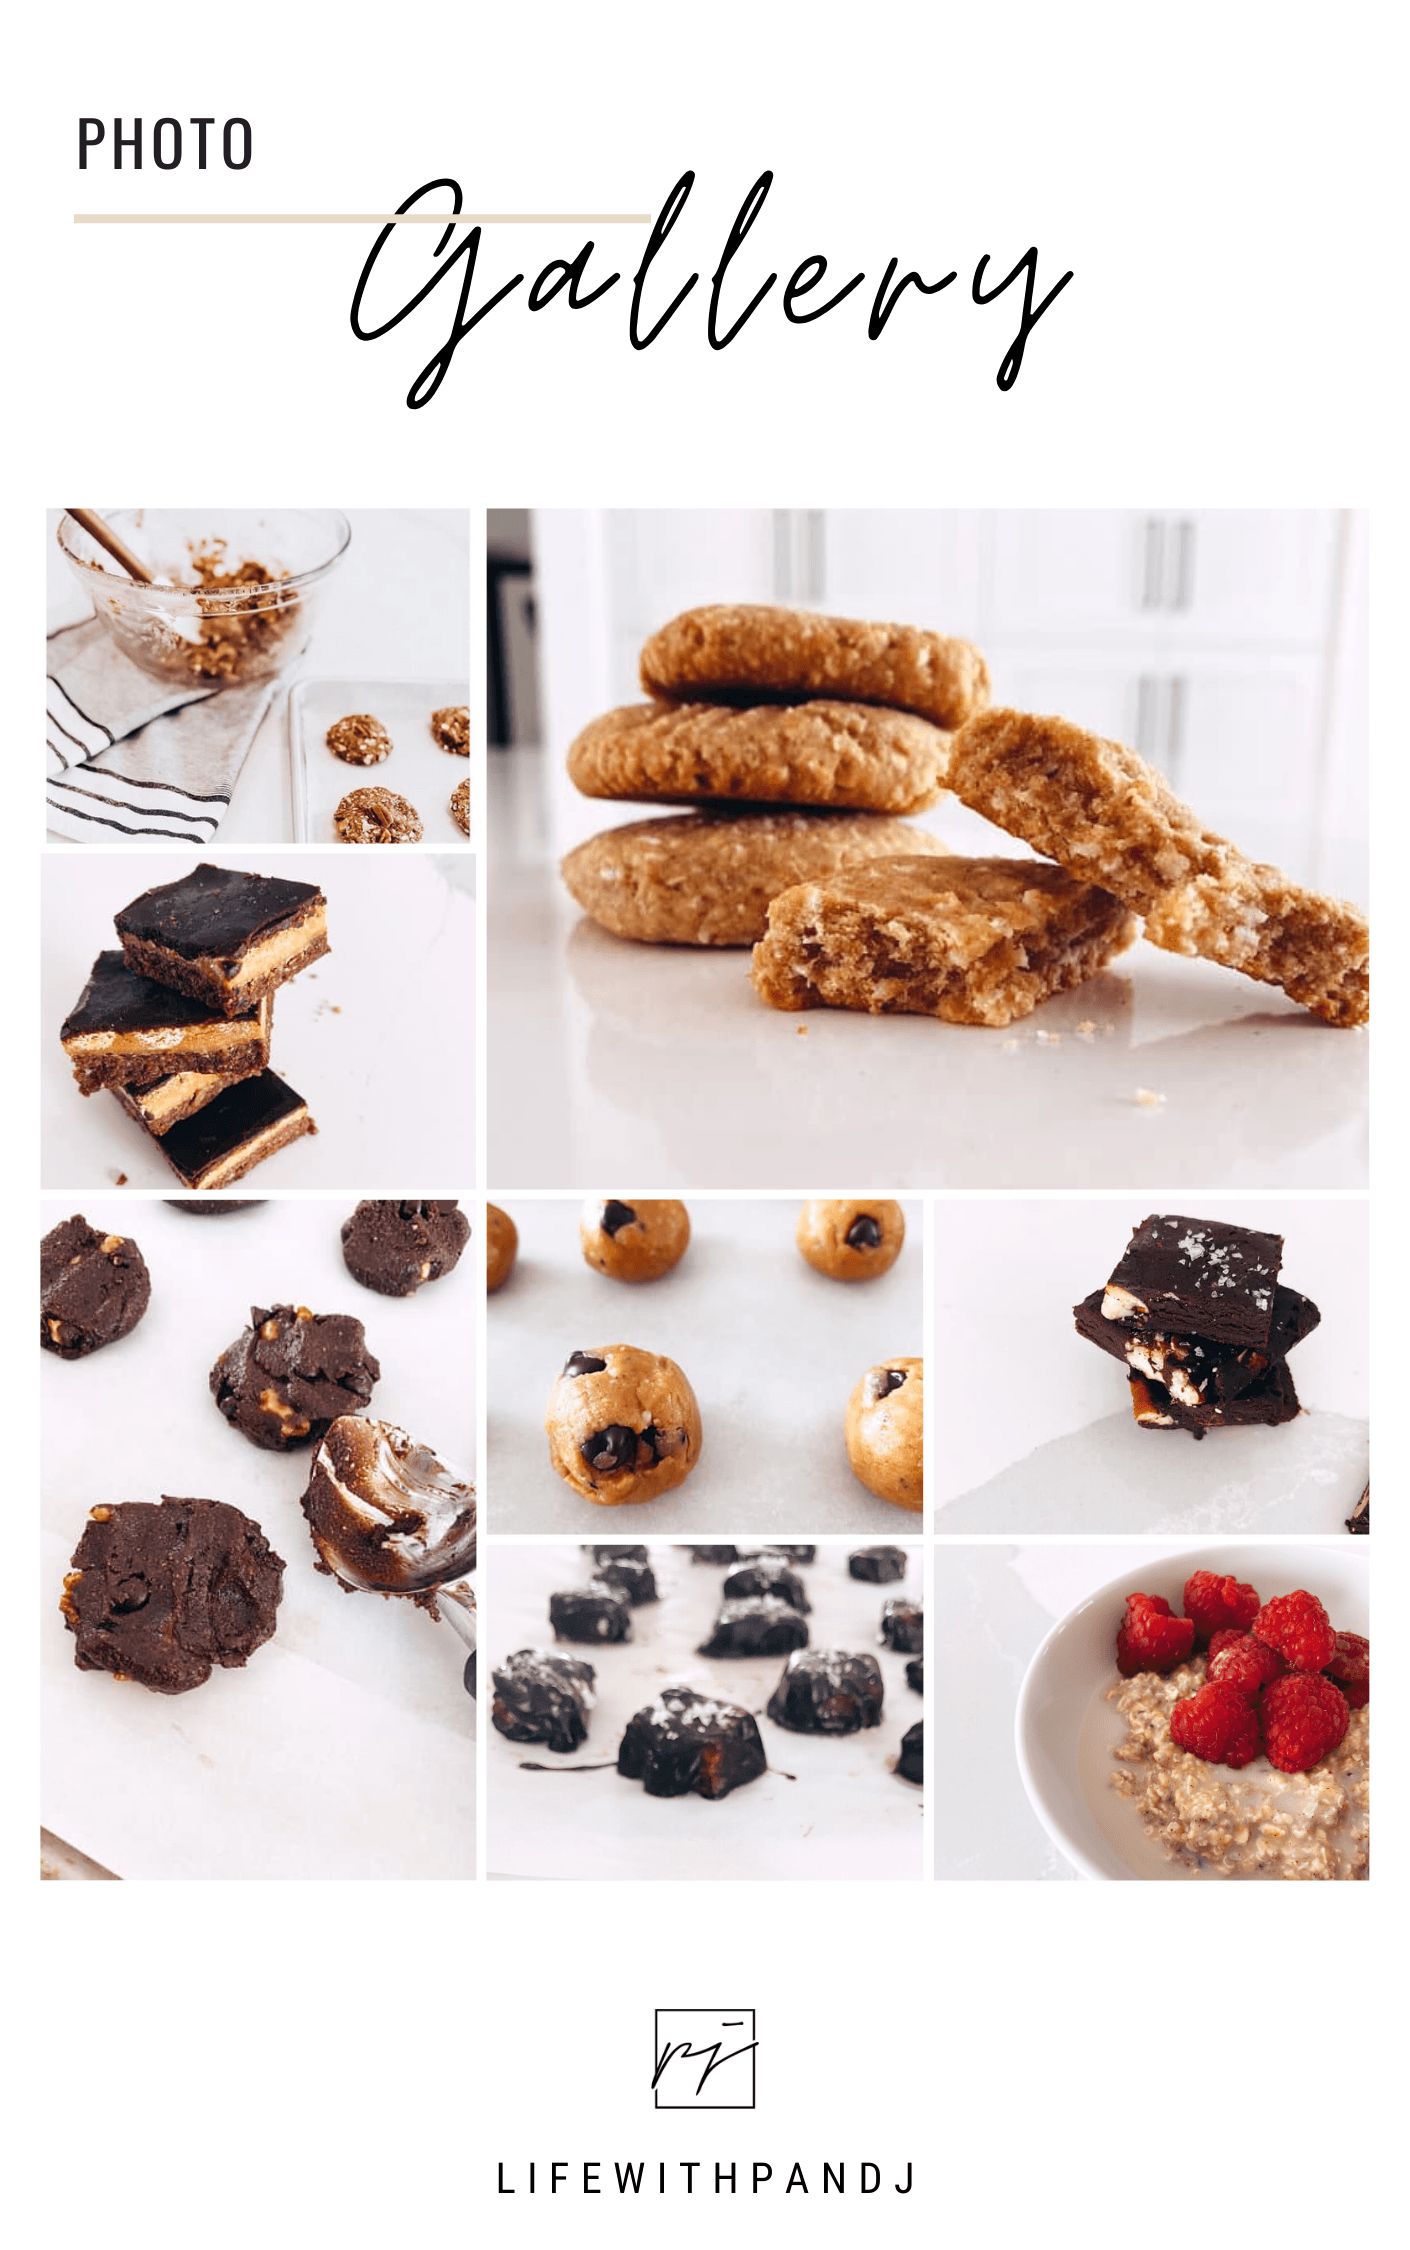 Sweet Treats E-Cookbook photo gallery. Peanut butter cookies, breakfast cookies, peanut butter layered bars, espresso brownie cookies, cookie dough bites, fudge squares, salted caramels, overnight oats with raspberries on top - lifewithPandJ